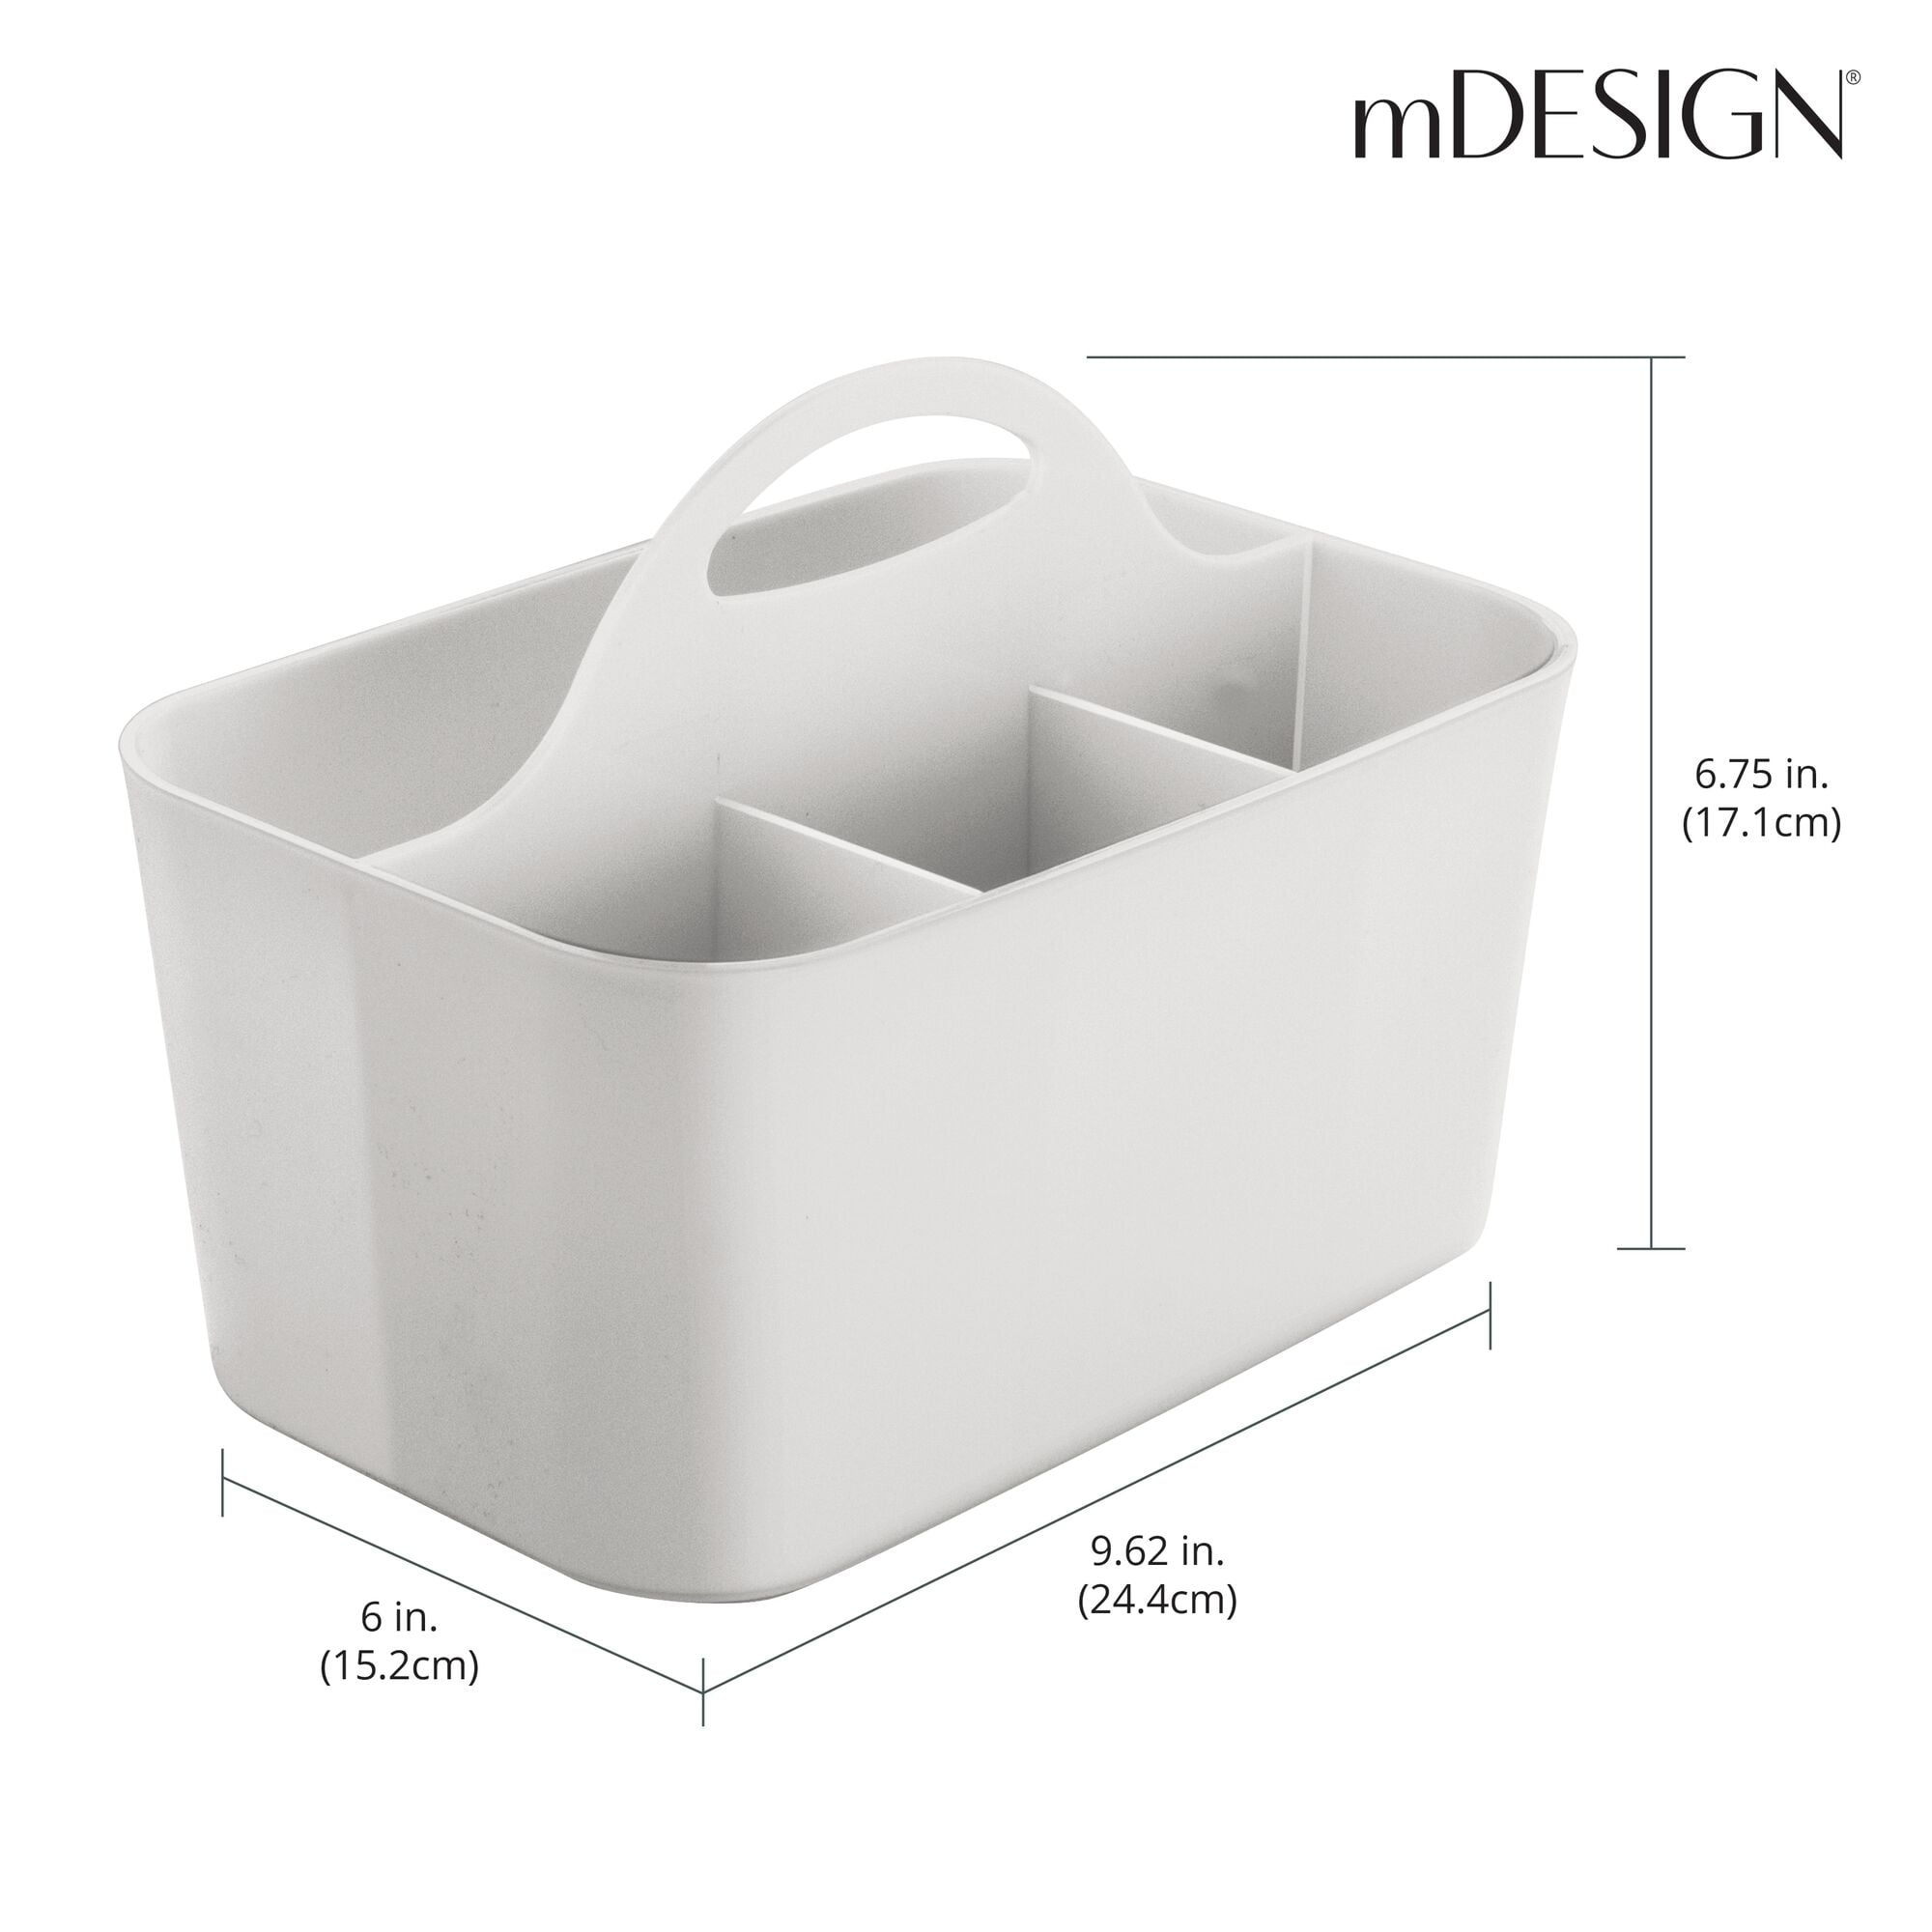 ALINK Plastic Shower Caddy Basket with Compartments - Gray